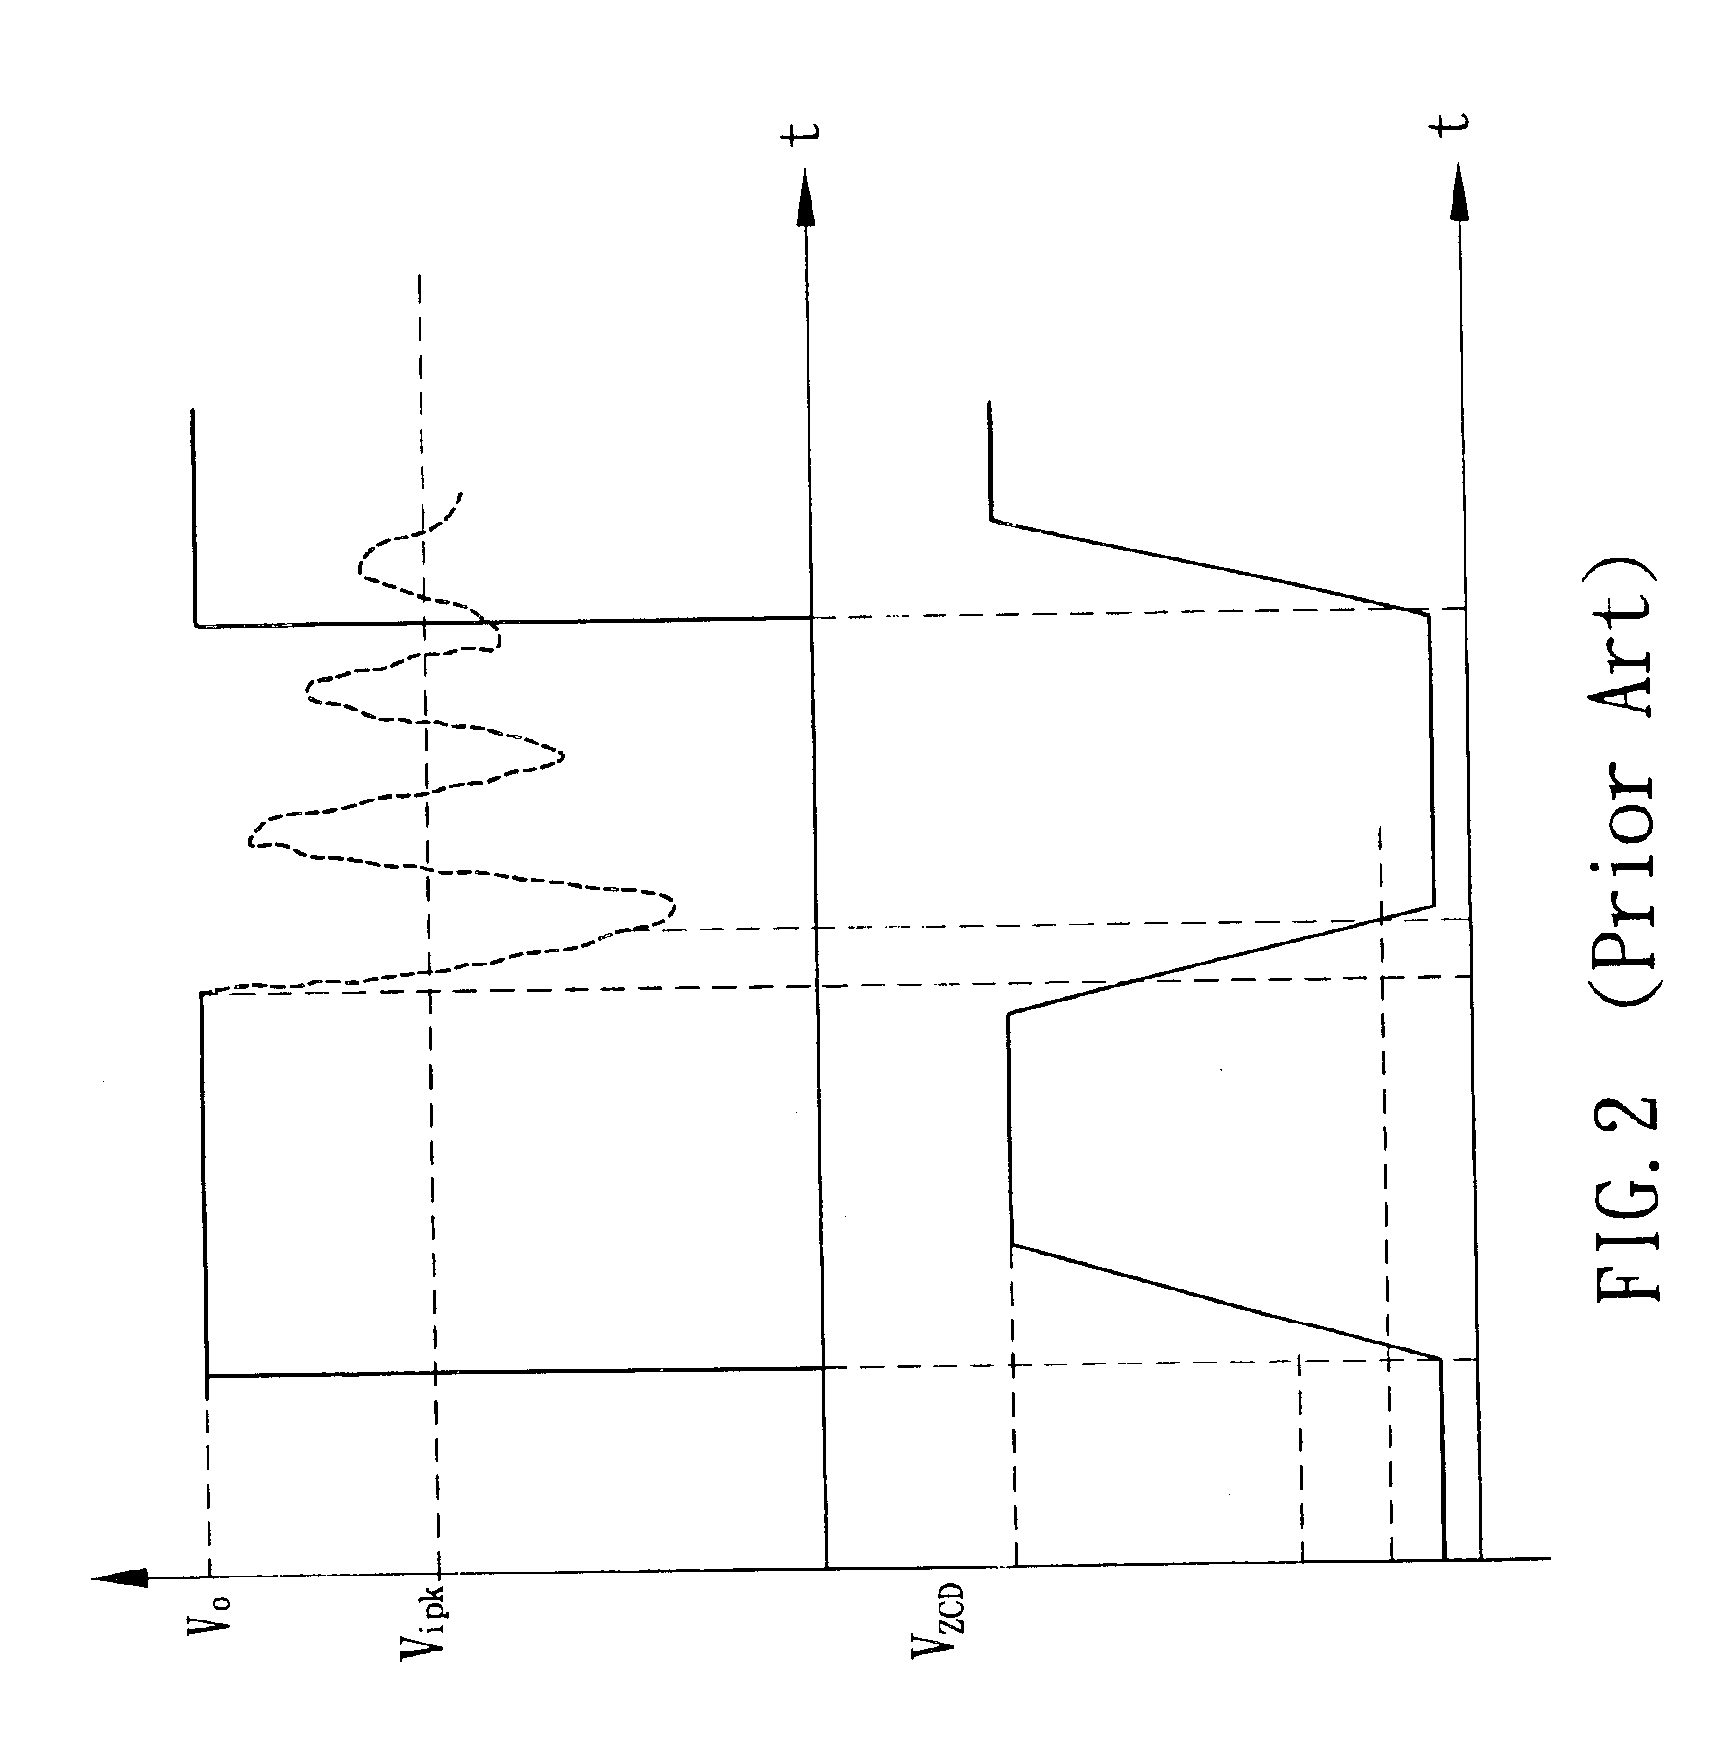 Auxiliary circuit for power factor corrector having self-power supplying and zero current detection mechanisms